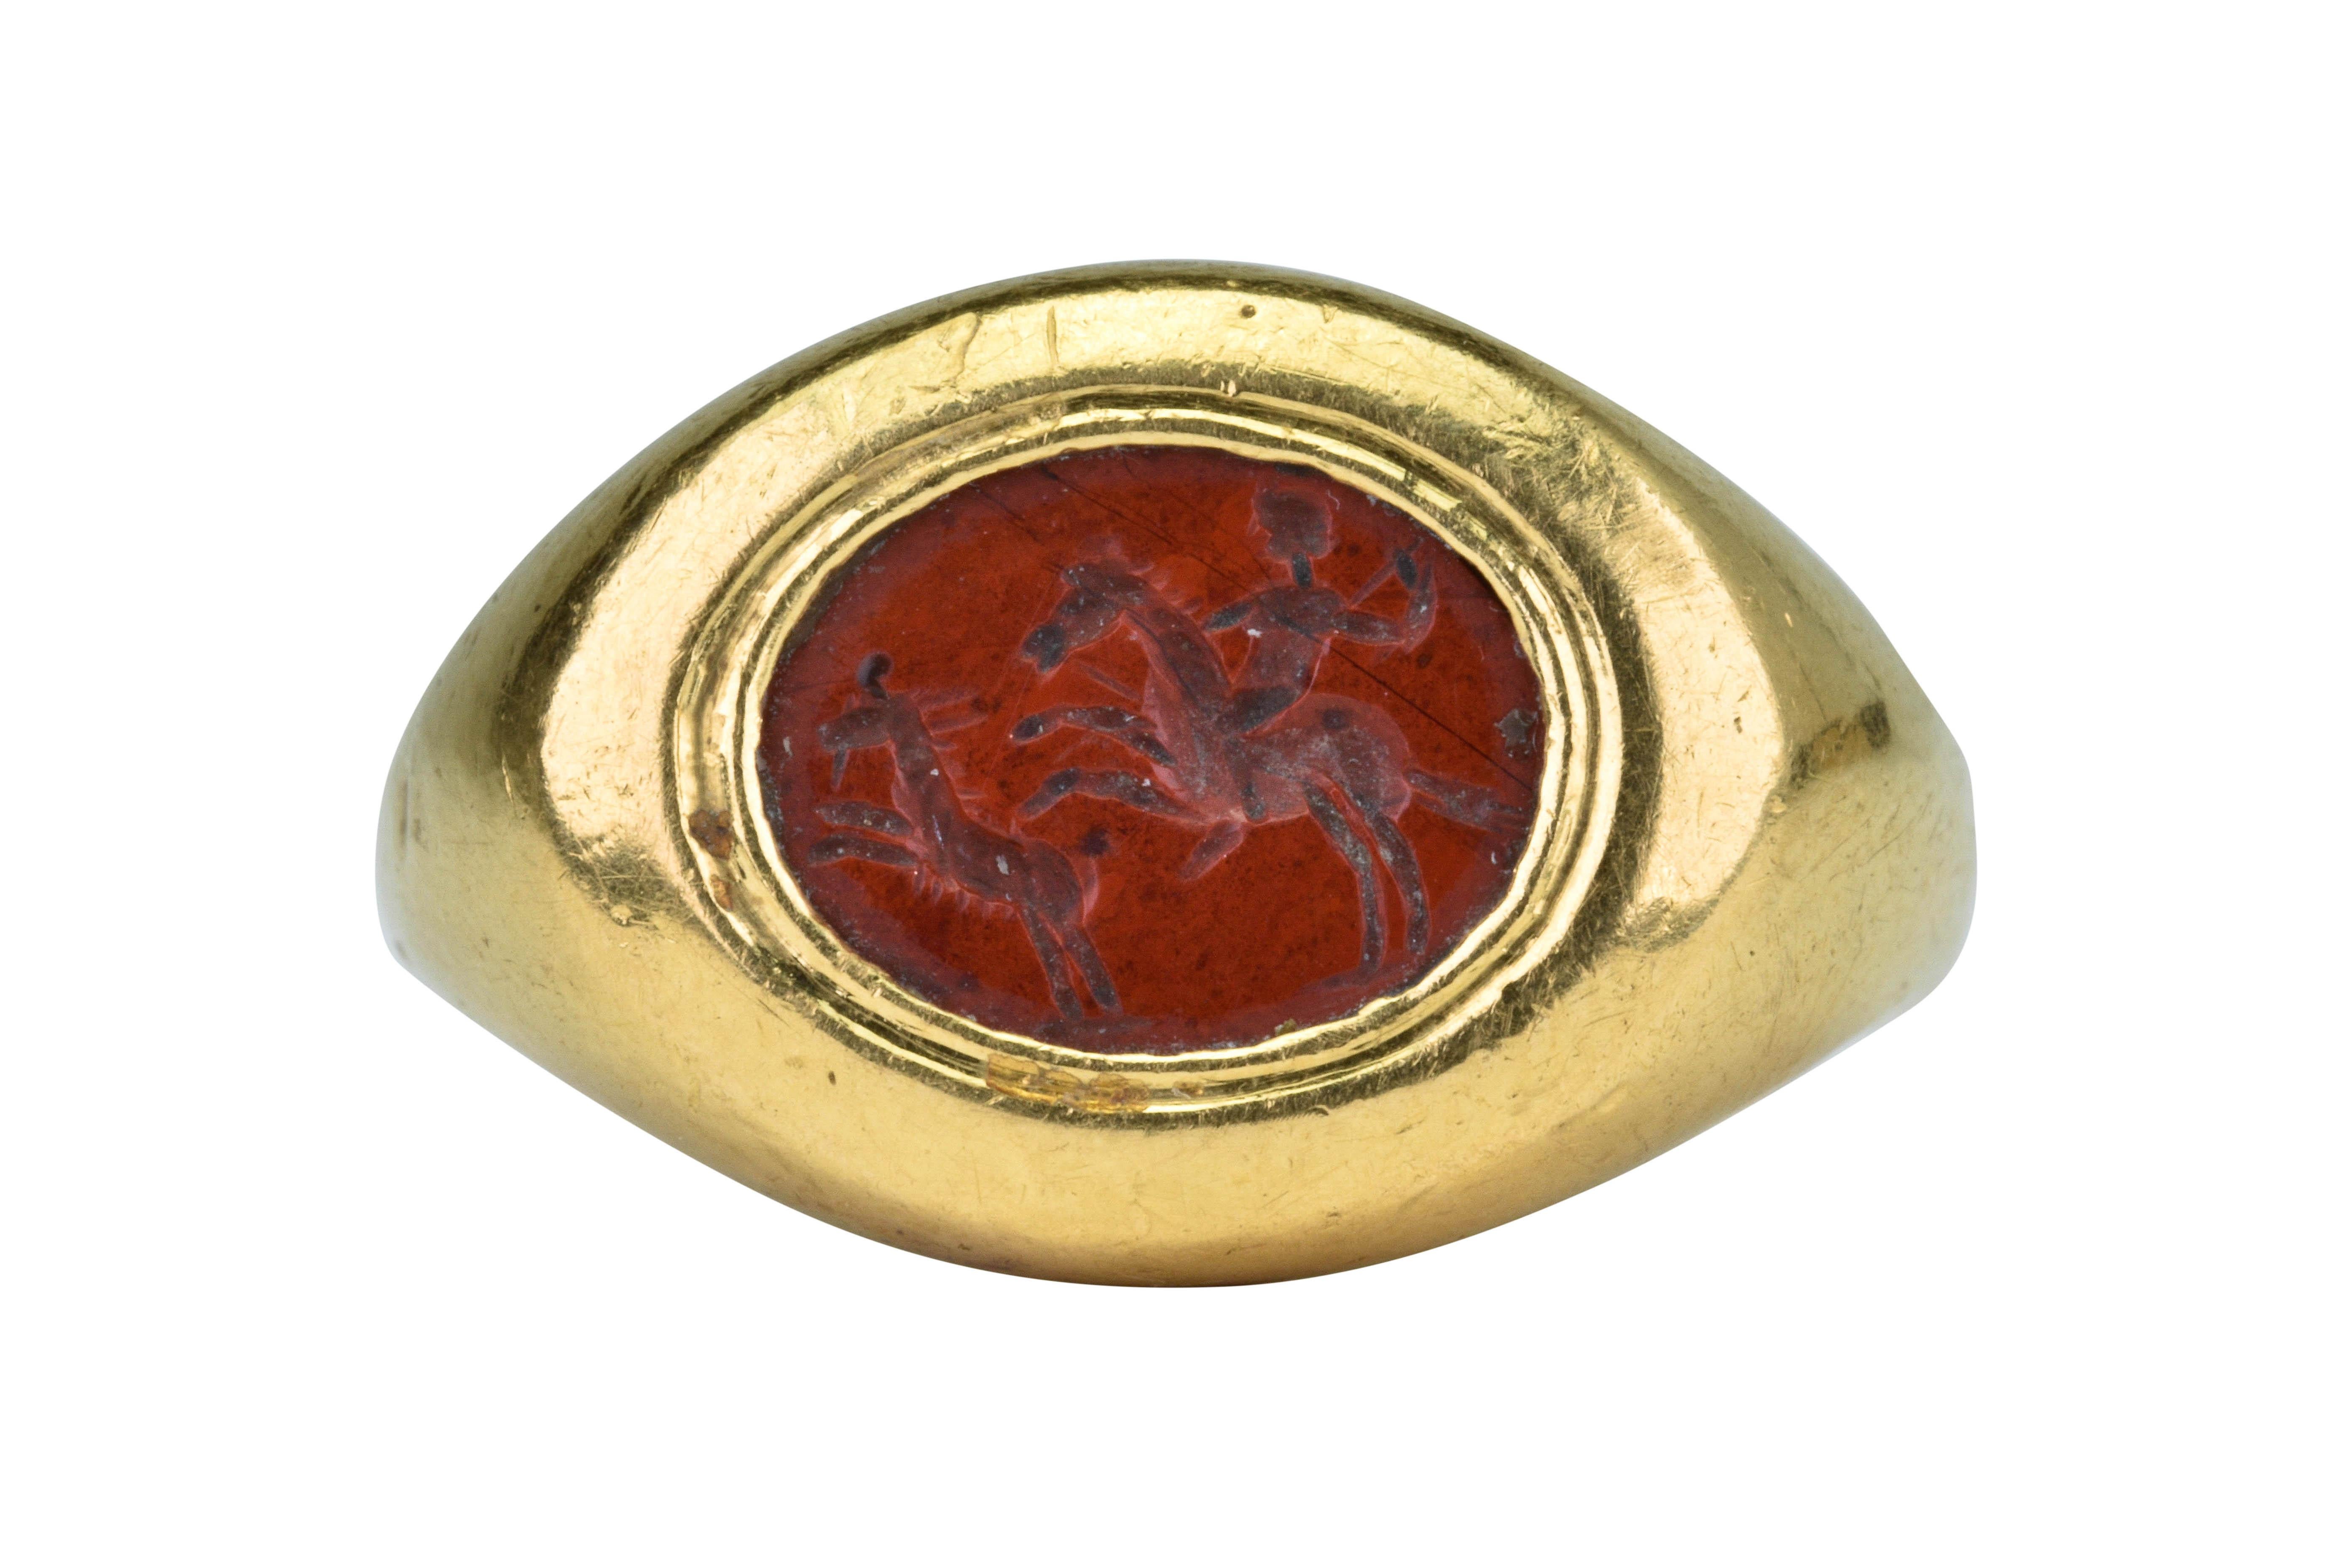 Rare Ancient Roman Gold Signet Ring with Carnelian Intaglio depicting a Hunting Scene

Ca. 100-300 AD

A rare Ancient Roman gold signet ring composed of a round, flat-section hoop with expanded and carinated shoulders; bezel containing a carnelian